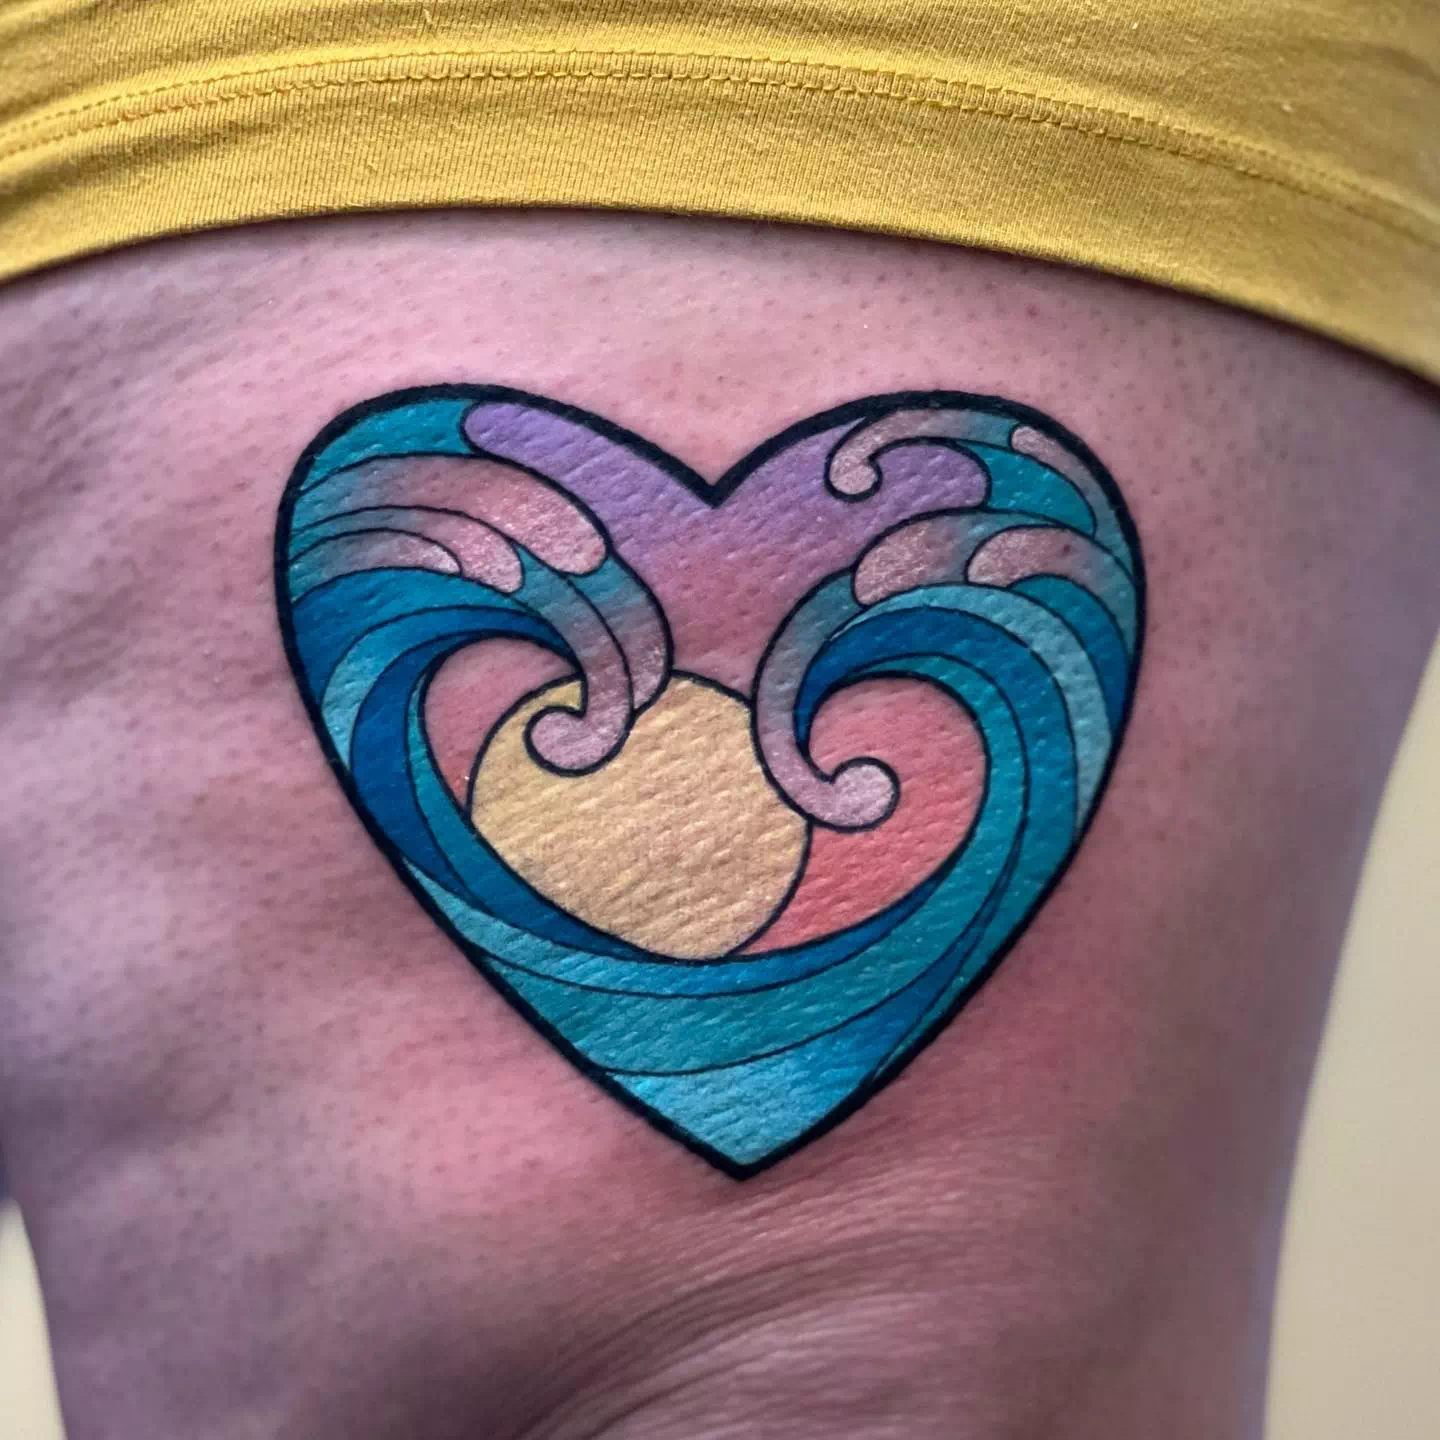 Dramatic And Colorful Heart Tattoo With Splash Of Color